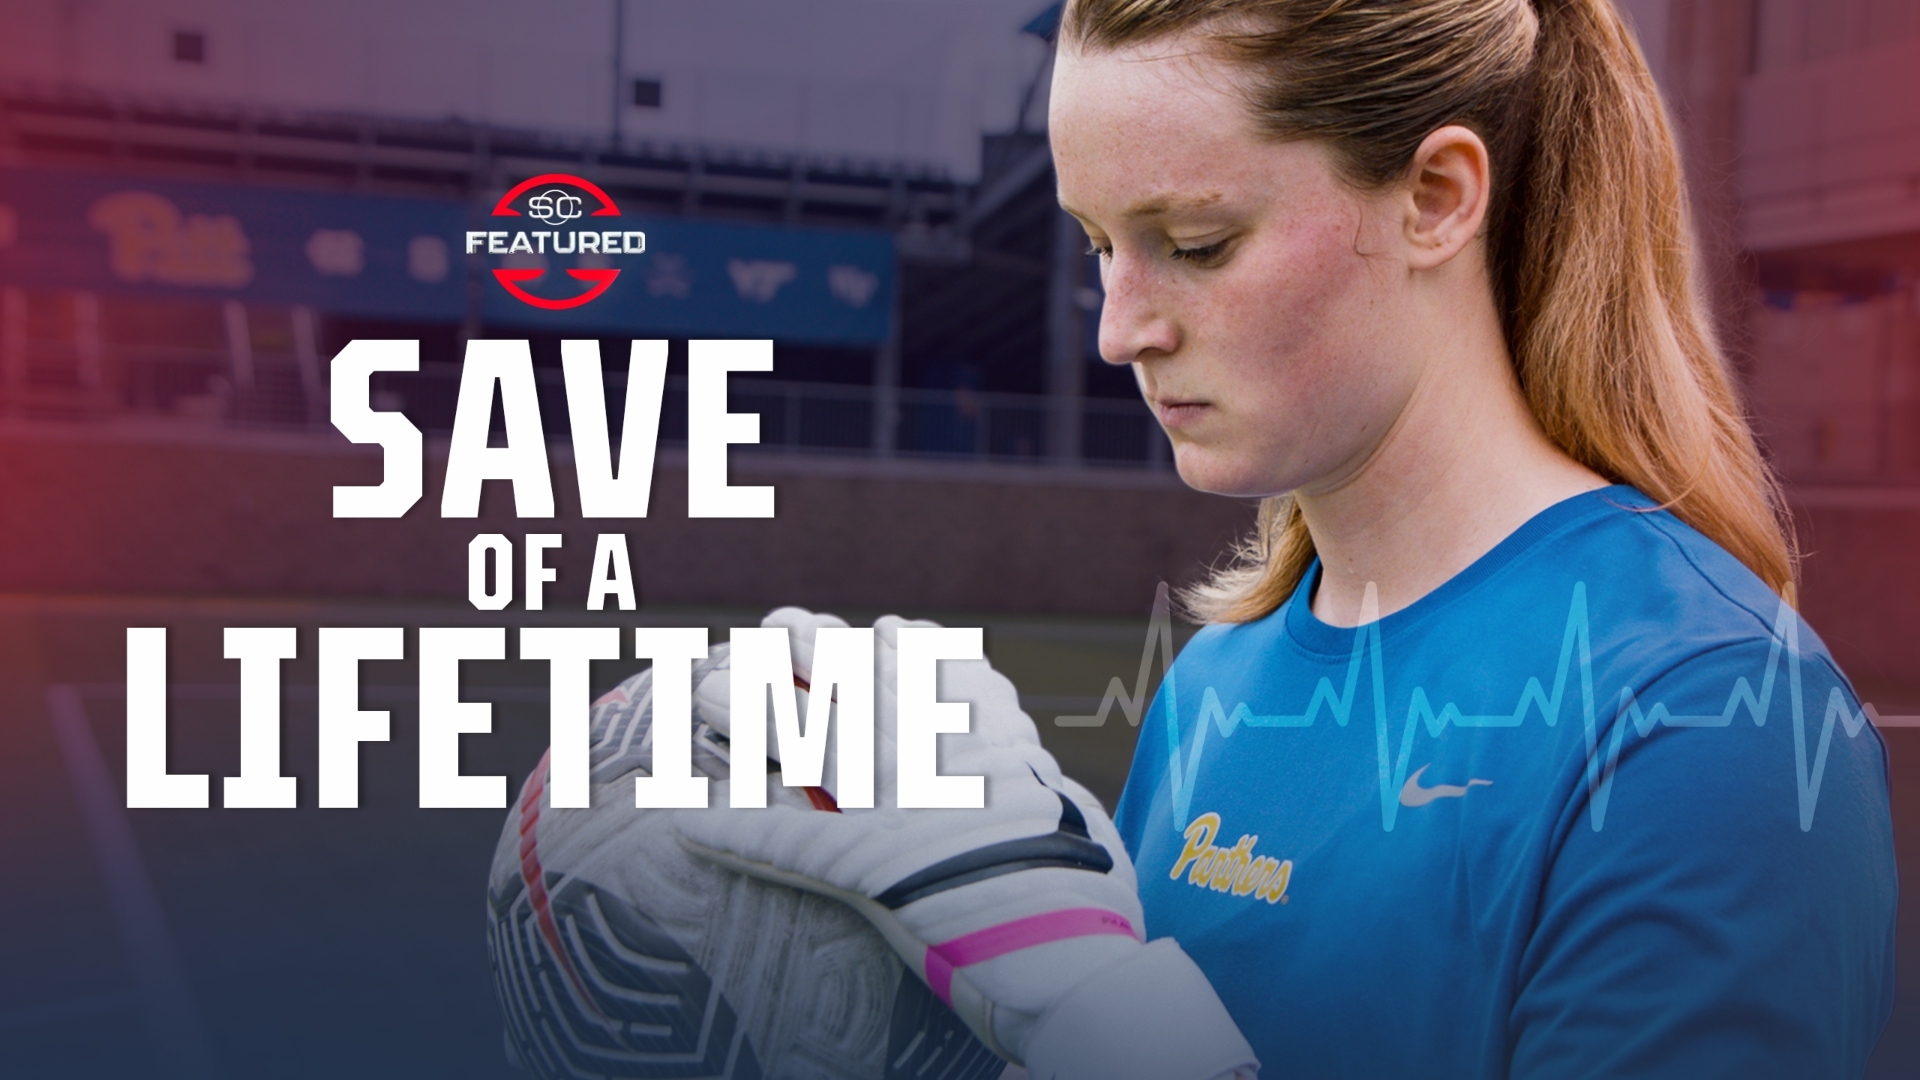 SC Featured: Save of a Lifetime